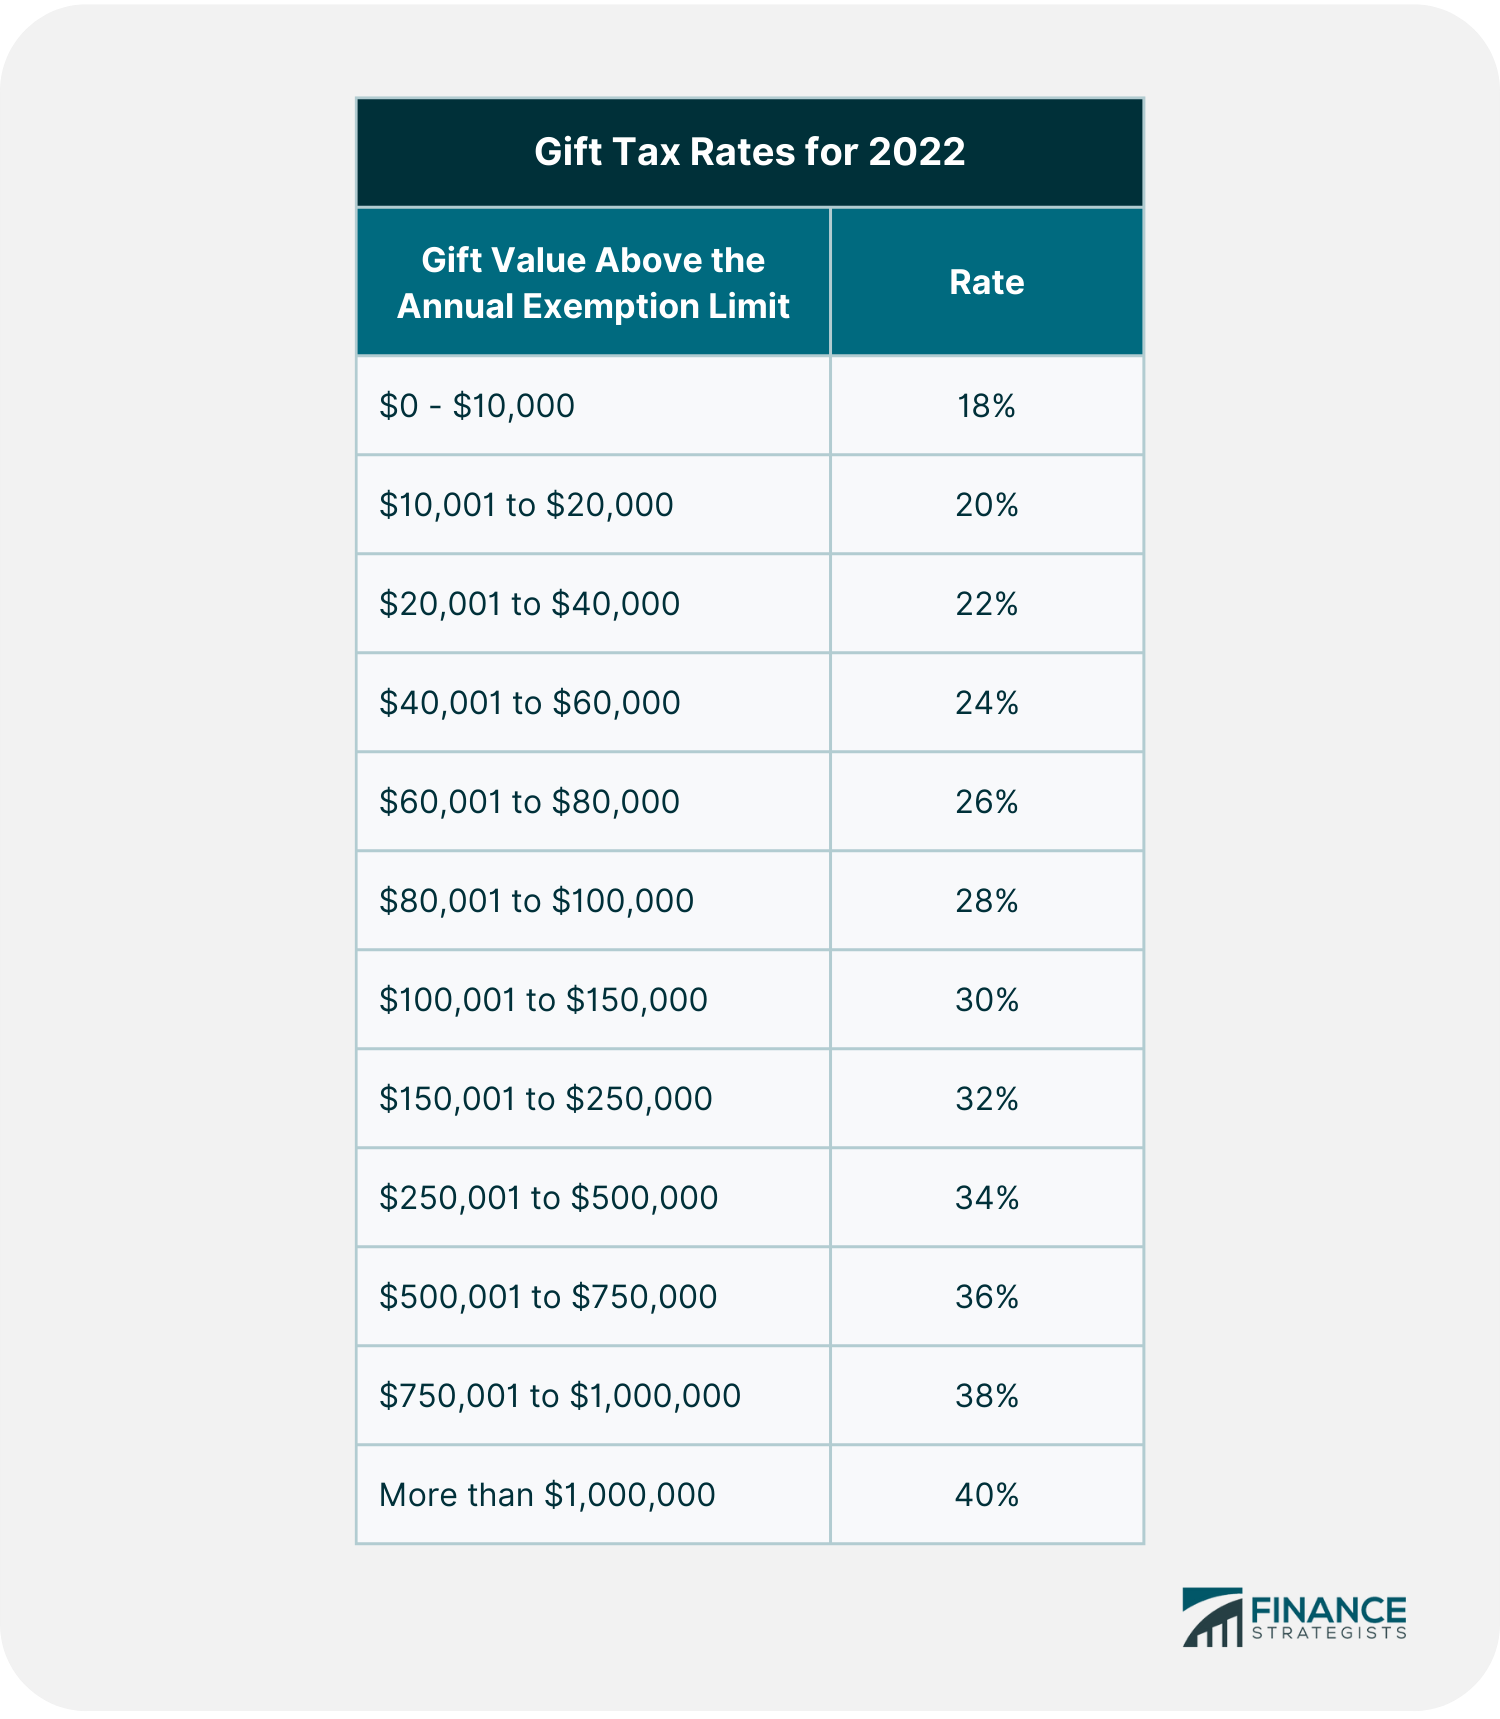 Gift_Tax_Rates_for_2022